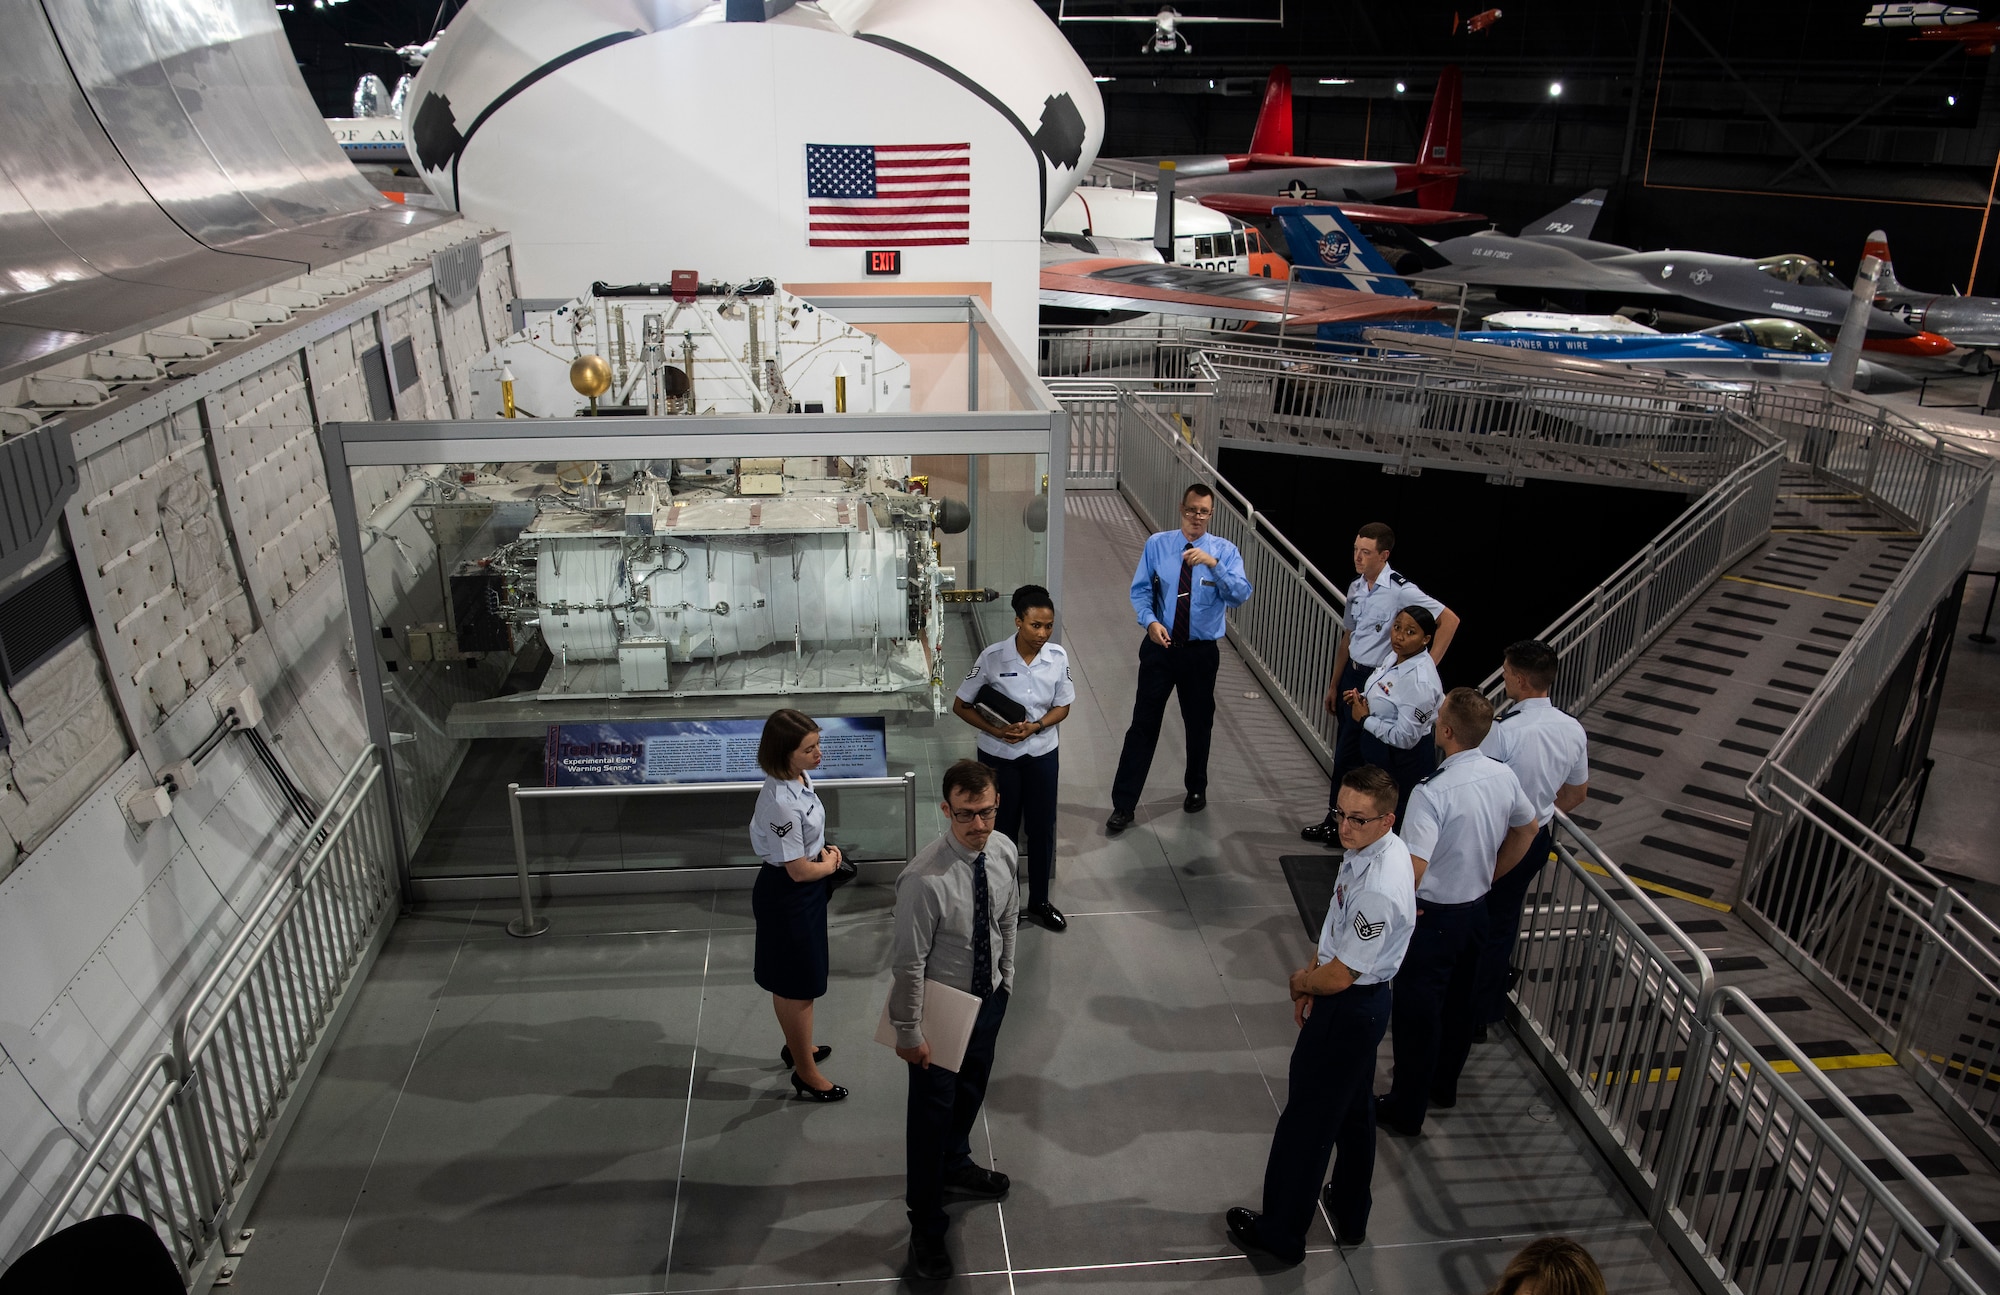 A group of Airmen from F.E. Warren Air Force Base, Wyo,. tour a space trainer at The National Museum of the U.S. Air Force Sept. 4, 2019, at Wright-Patterson Air Force Base, Ohio. The museum has four hangars dedicated to different eras of history within the Air Force, including the space gallery. (U.S. Air Force photo by Senior Airman Abbigayle Williams)